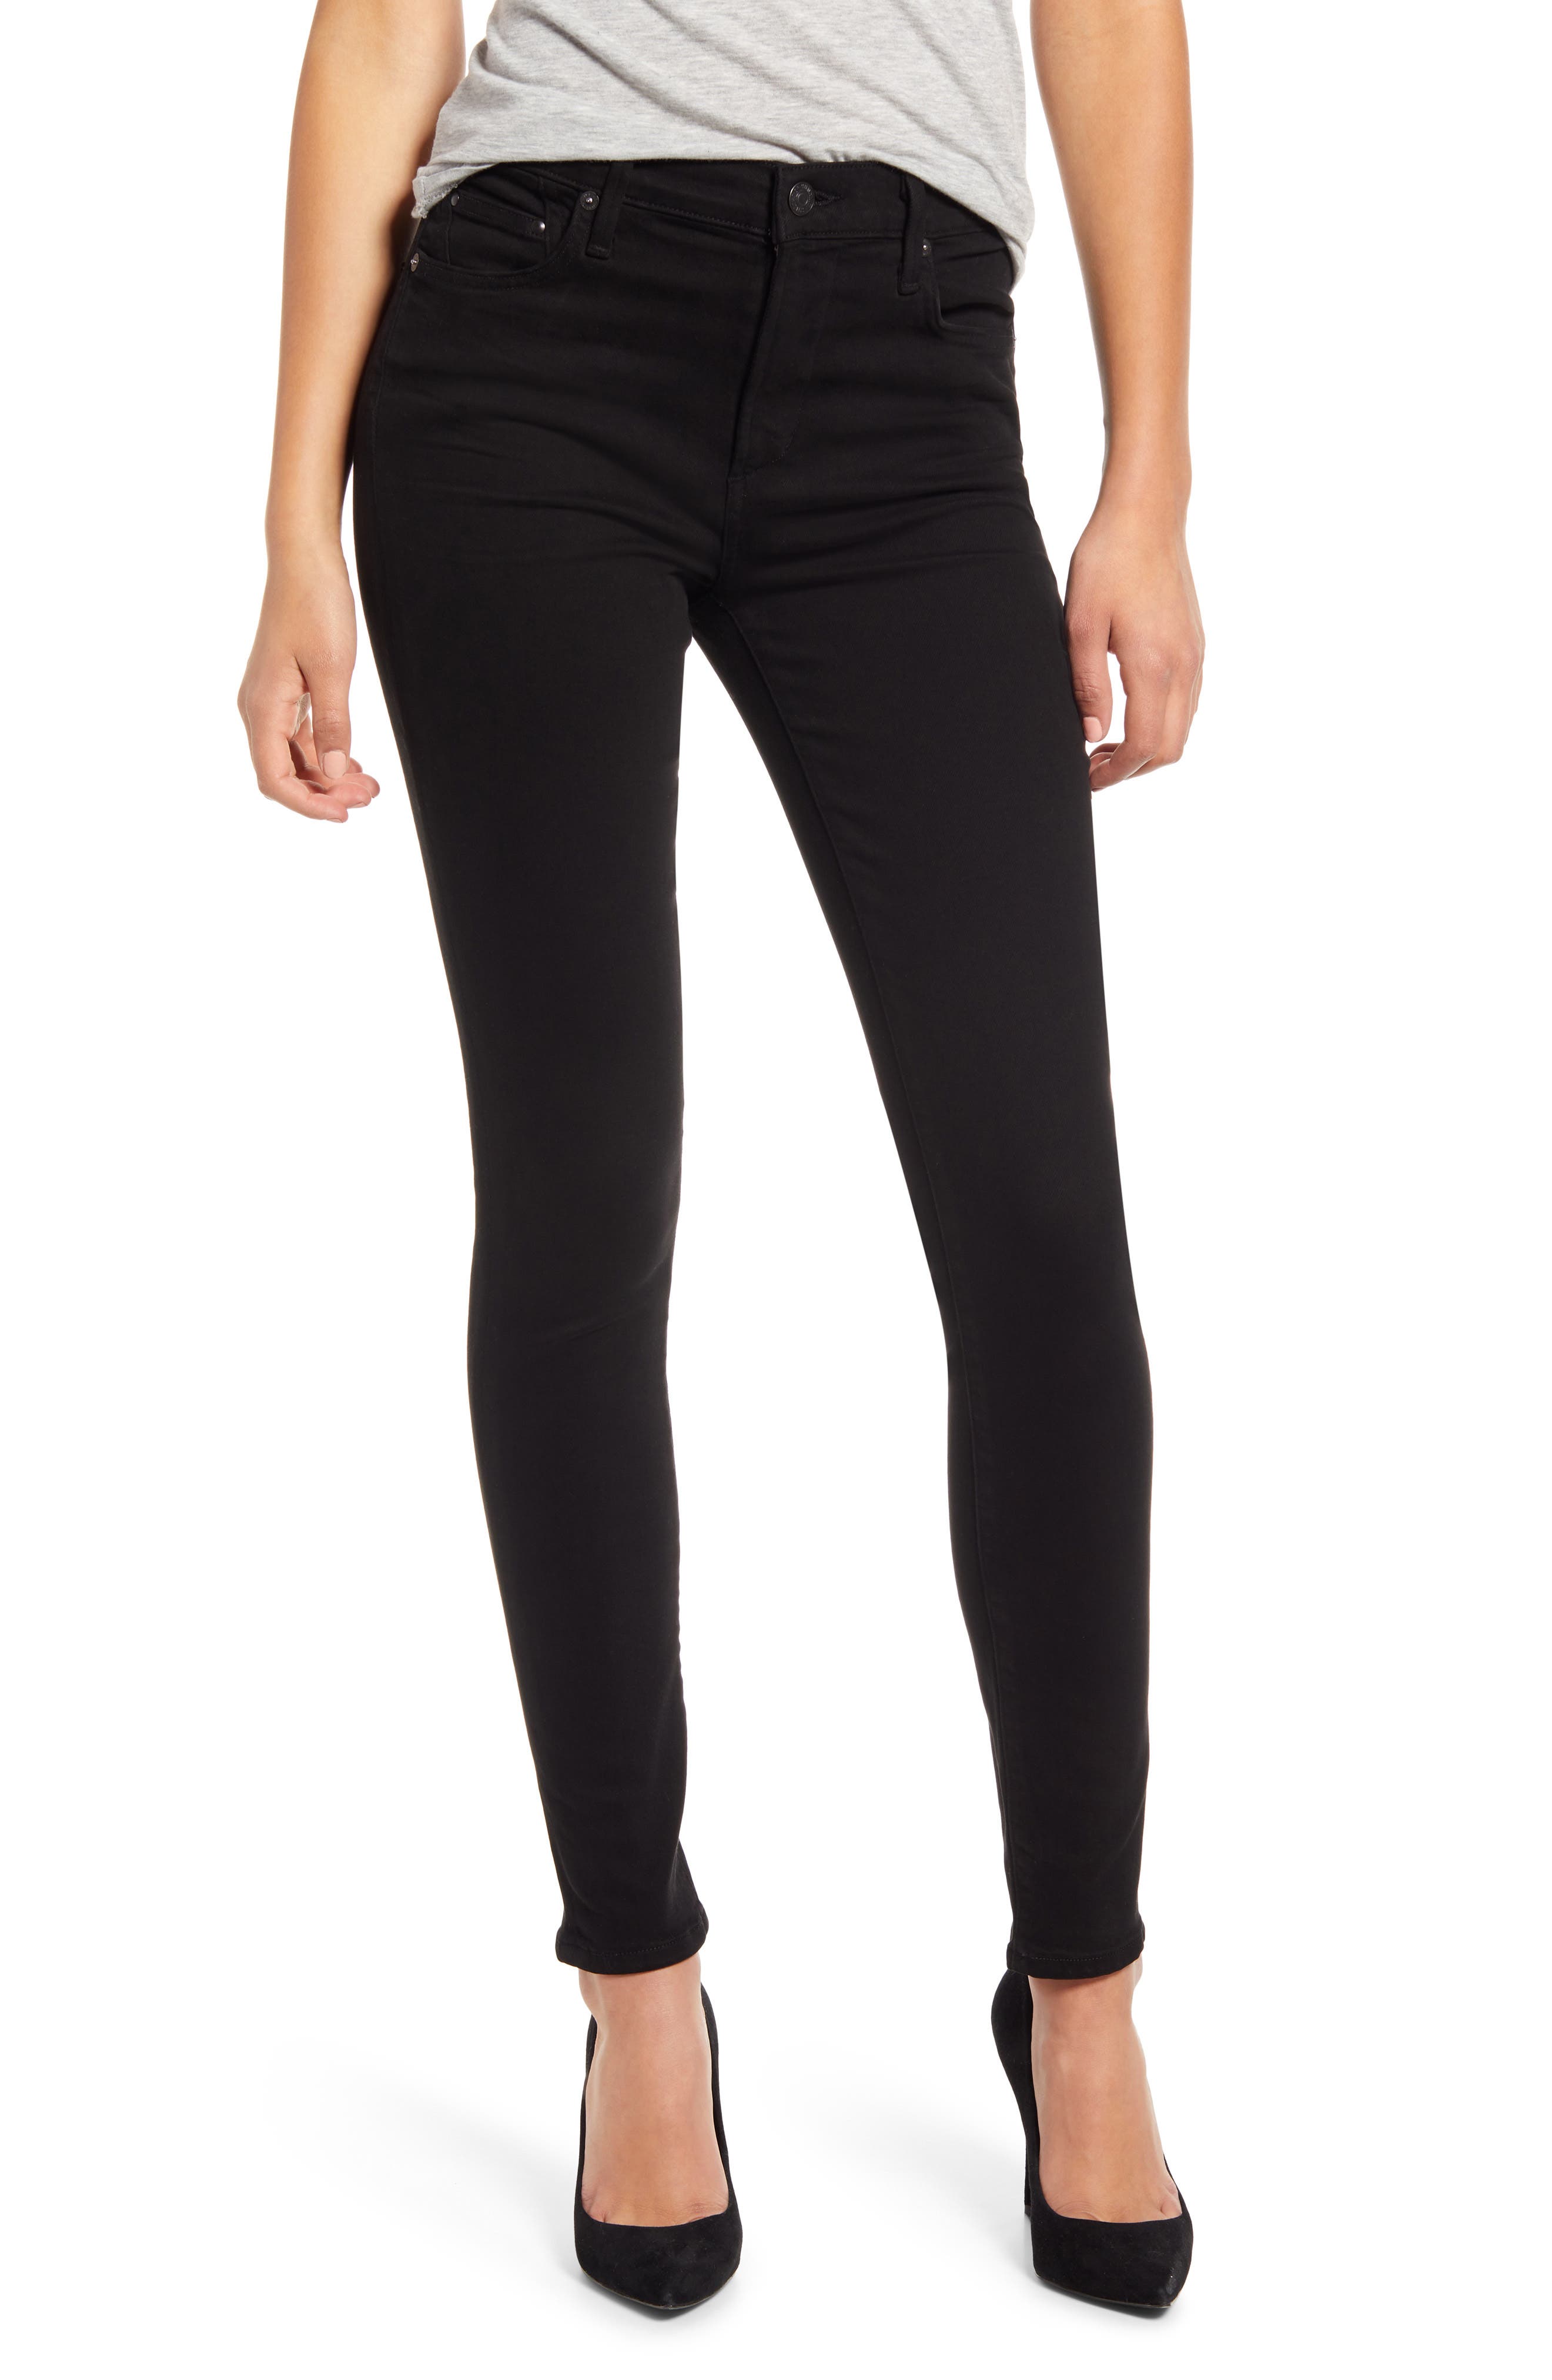 citizens for humanity jeans nordstrom